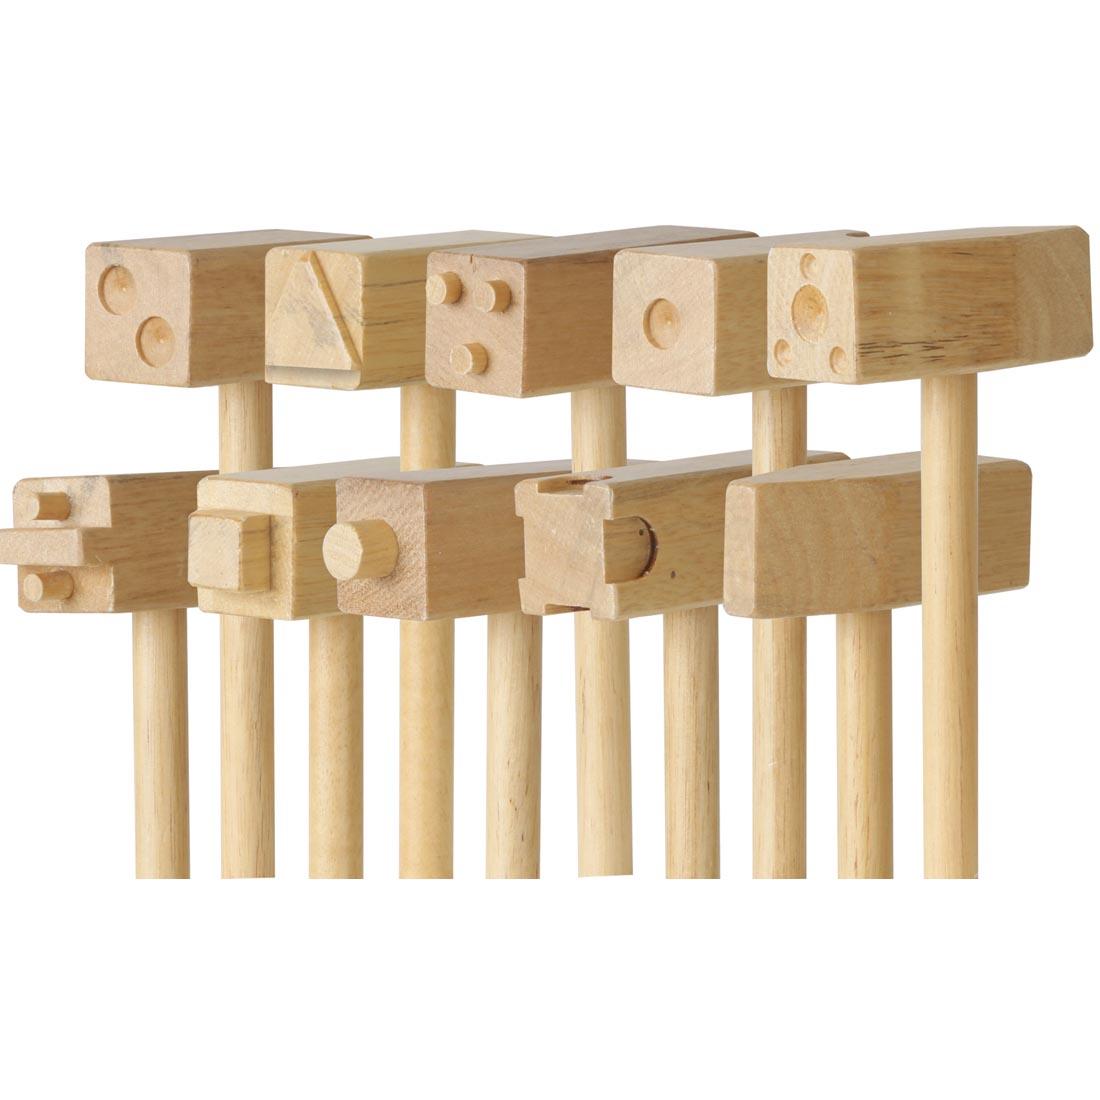 Creativity Street 5-count clay texturizer Wooden Hammer set, with both sizes of each hammer shown